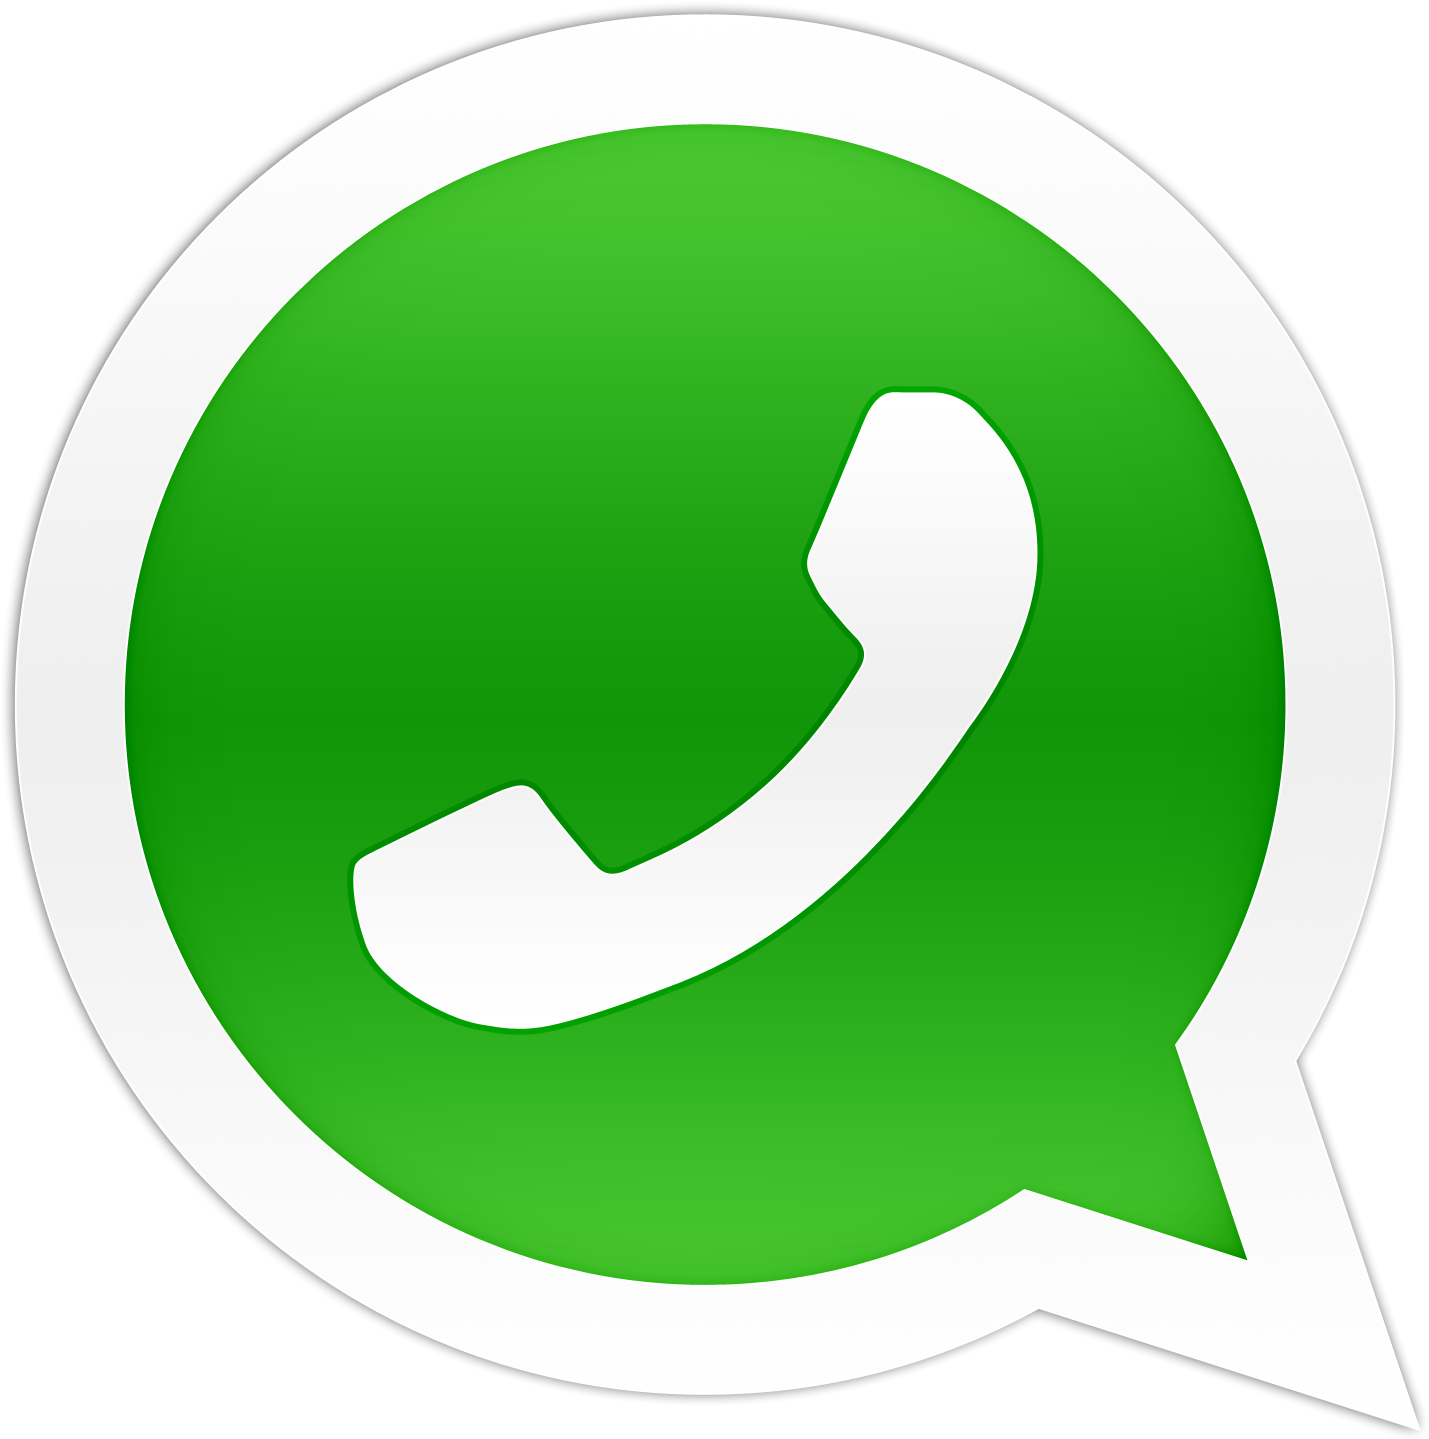 Whatsapp Iphone Messaging Apps Facebook Messenger - Whatsapp Icono Facebook Png (1527x1563)